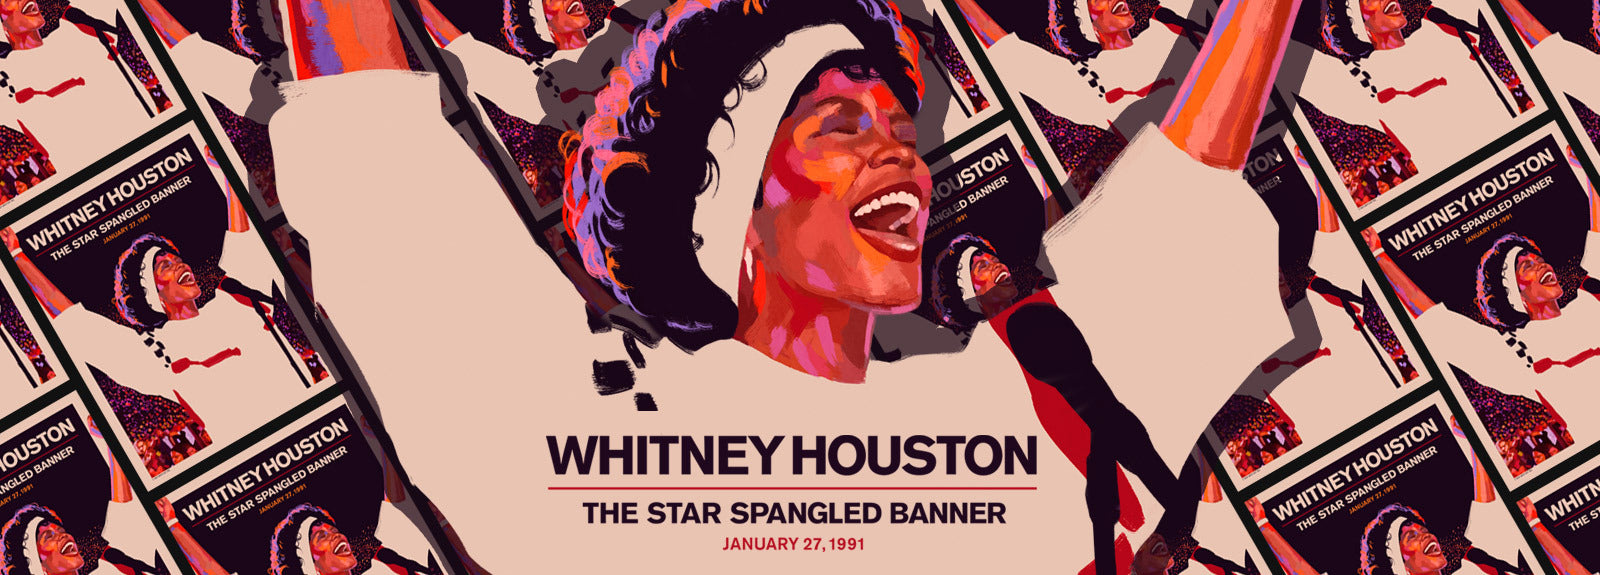 Behind the Poster: Whitney Houston The Star Spangled Banner